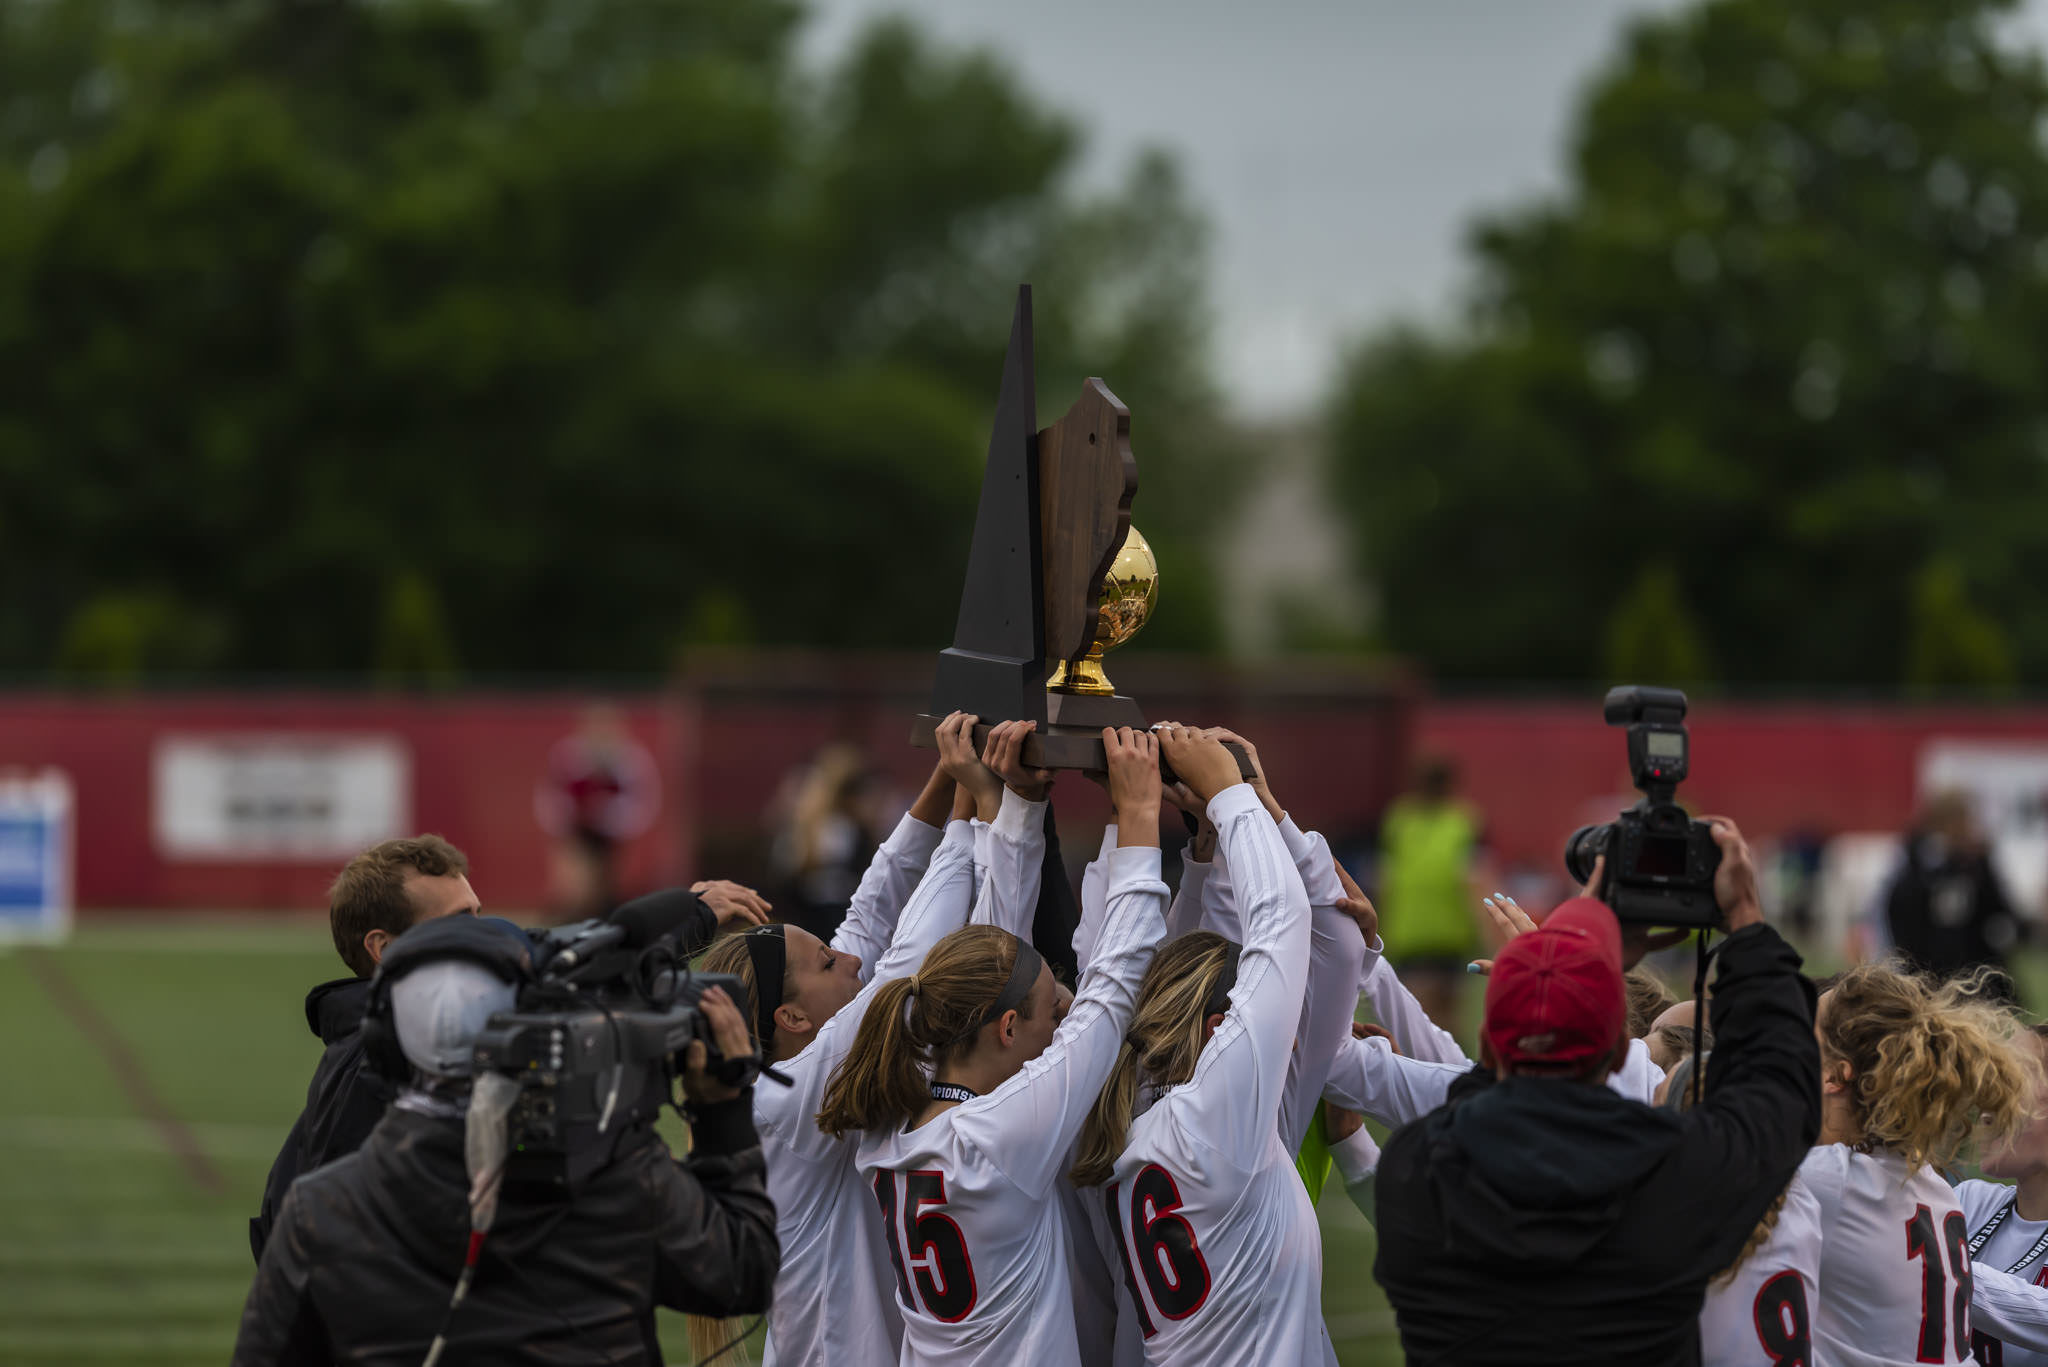 MUSKEGO STATE CHAMPIONS